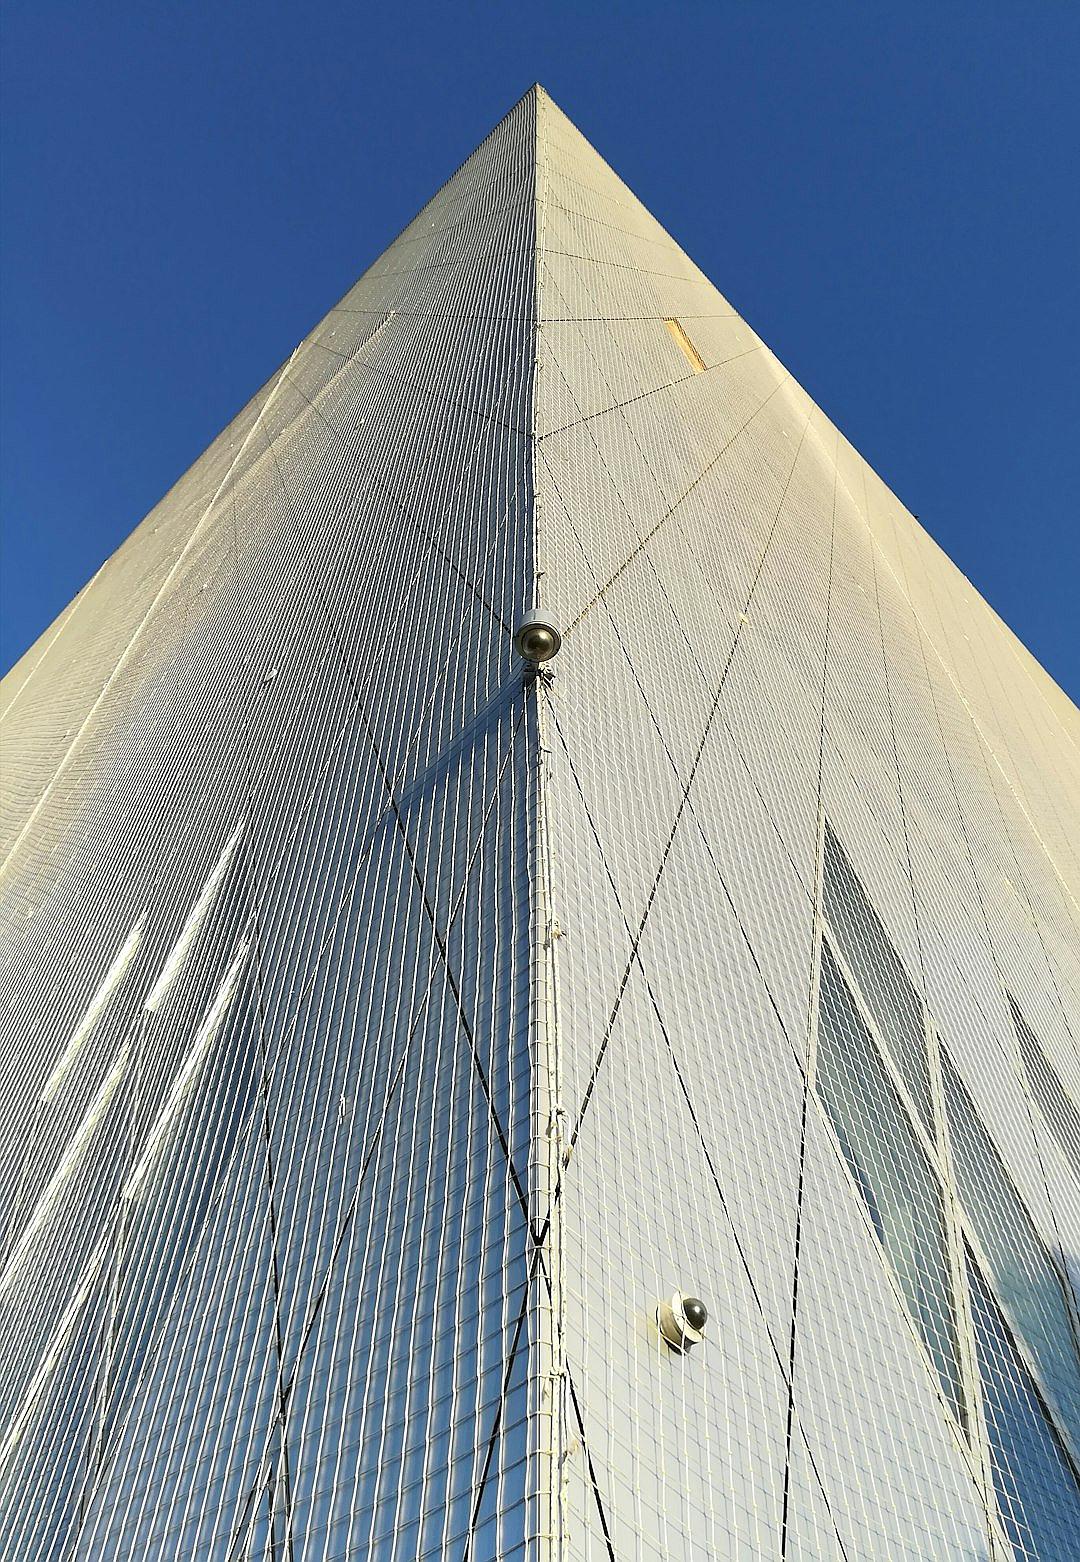 Low angle shot of the exterior wall of tower in glass, with thick lines on white canvas fabric attached to it. It is made up of metal mesh and has wires hanging from its top edge. In front there’s an open window that leads into another building, and behind you can see blue sky. The photo was taken by professional photographers using Sony Alpha A7 III camera.